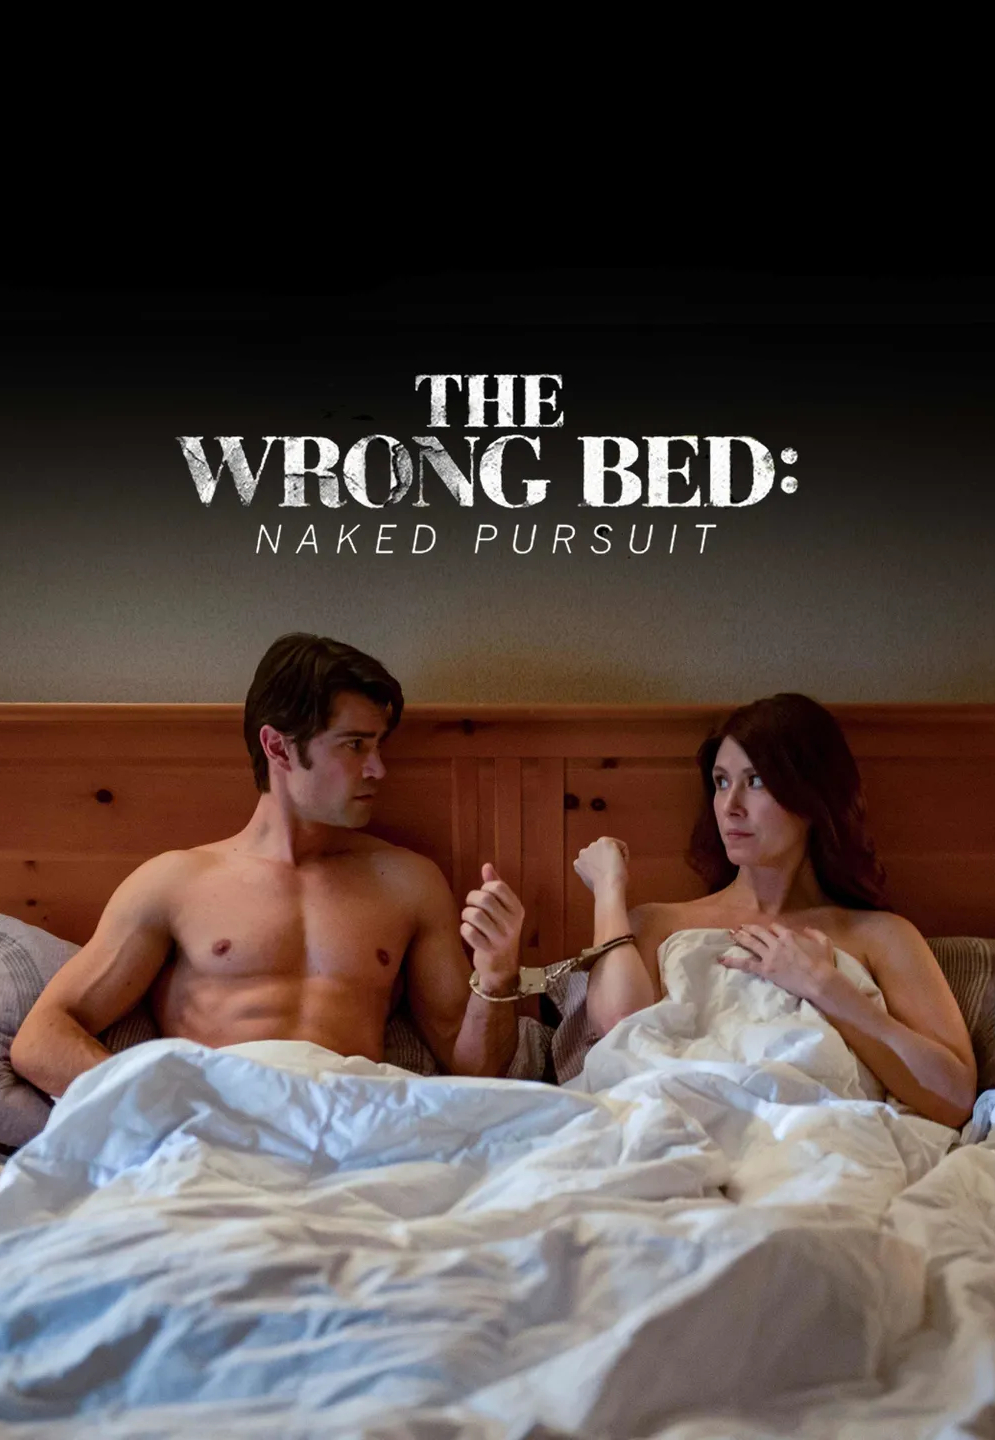 The Wrong Bed: Naked Pursuit (2017) Screenshot 3